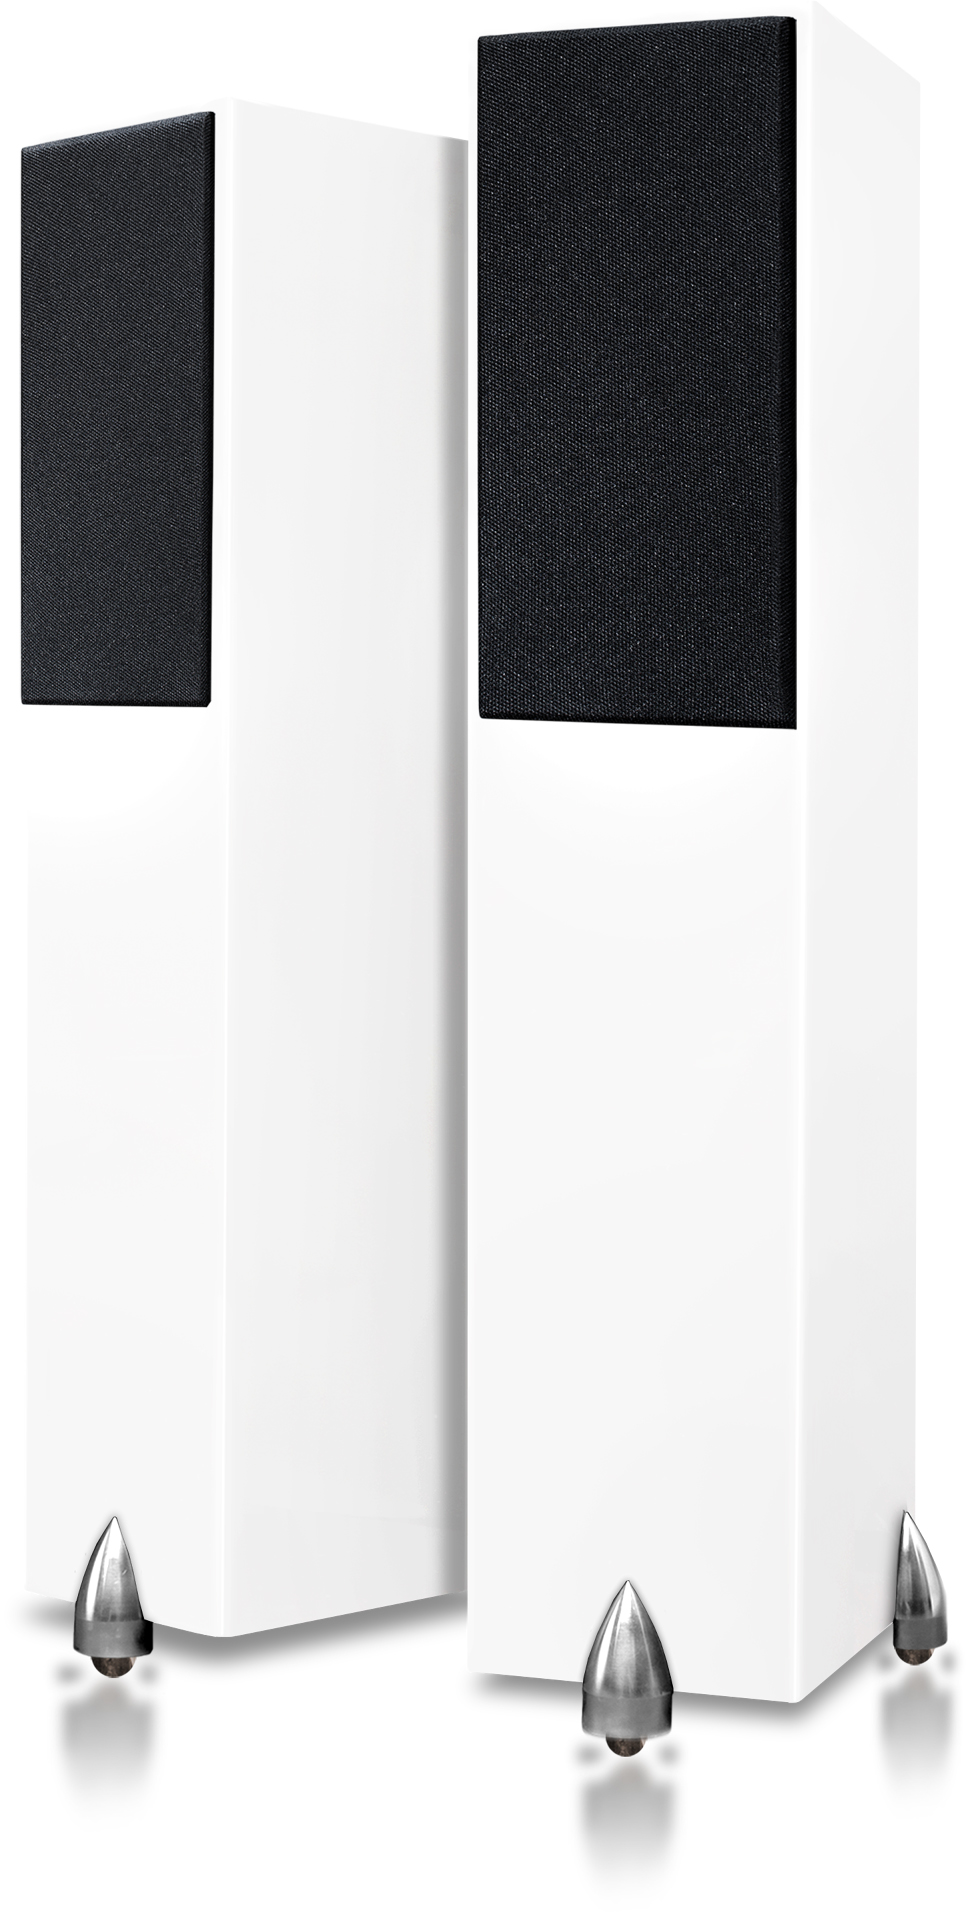 Totem Acoustic Forest white